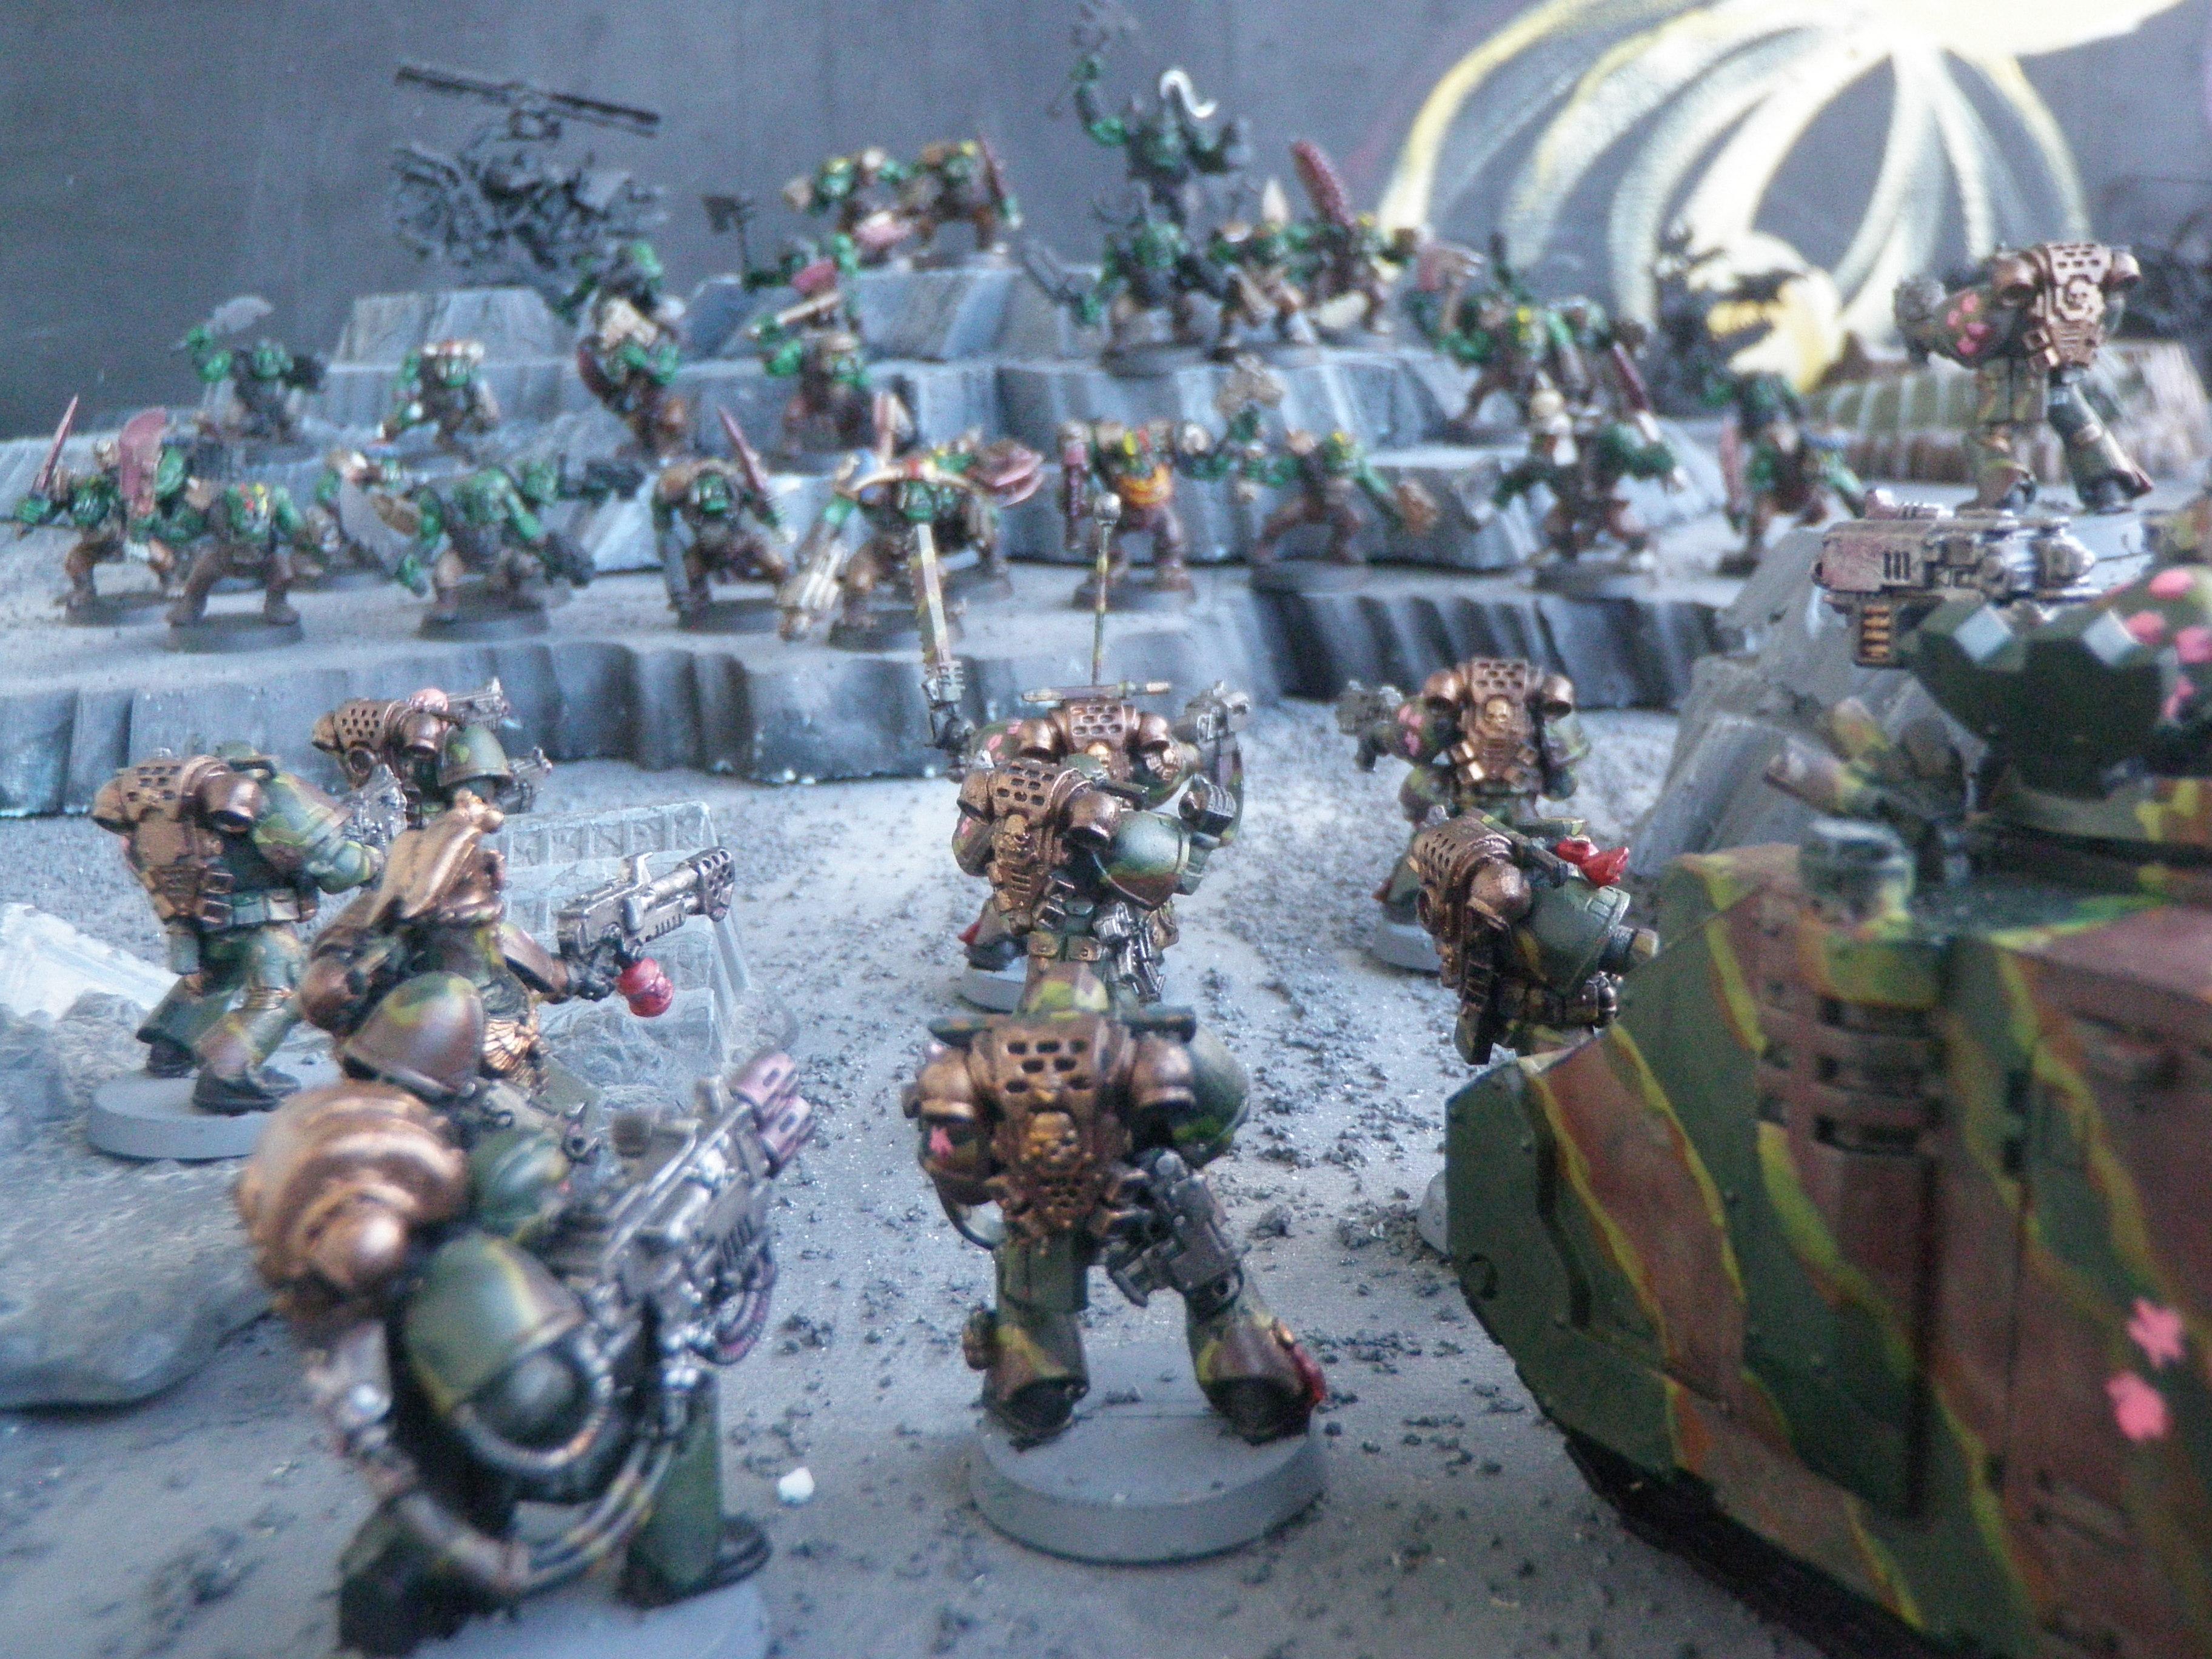 Camouflage, Space Marines